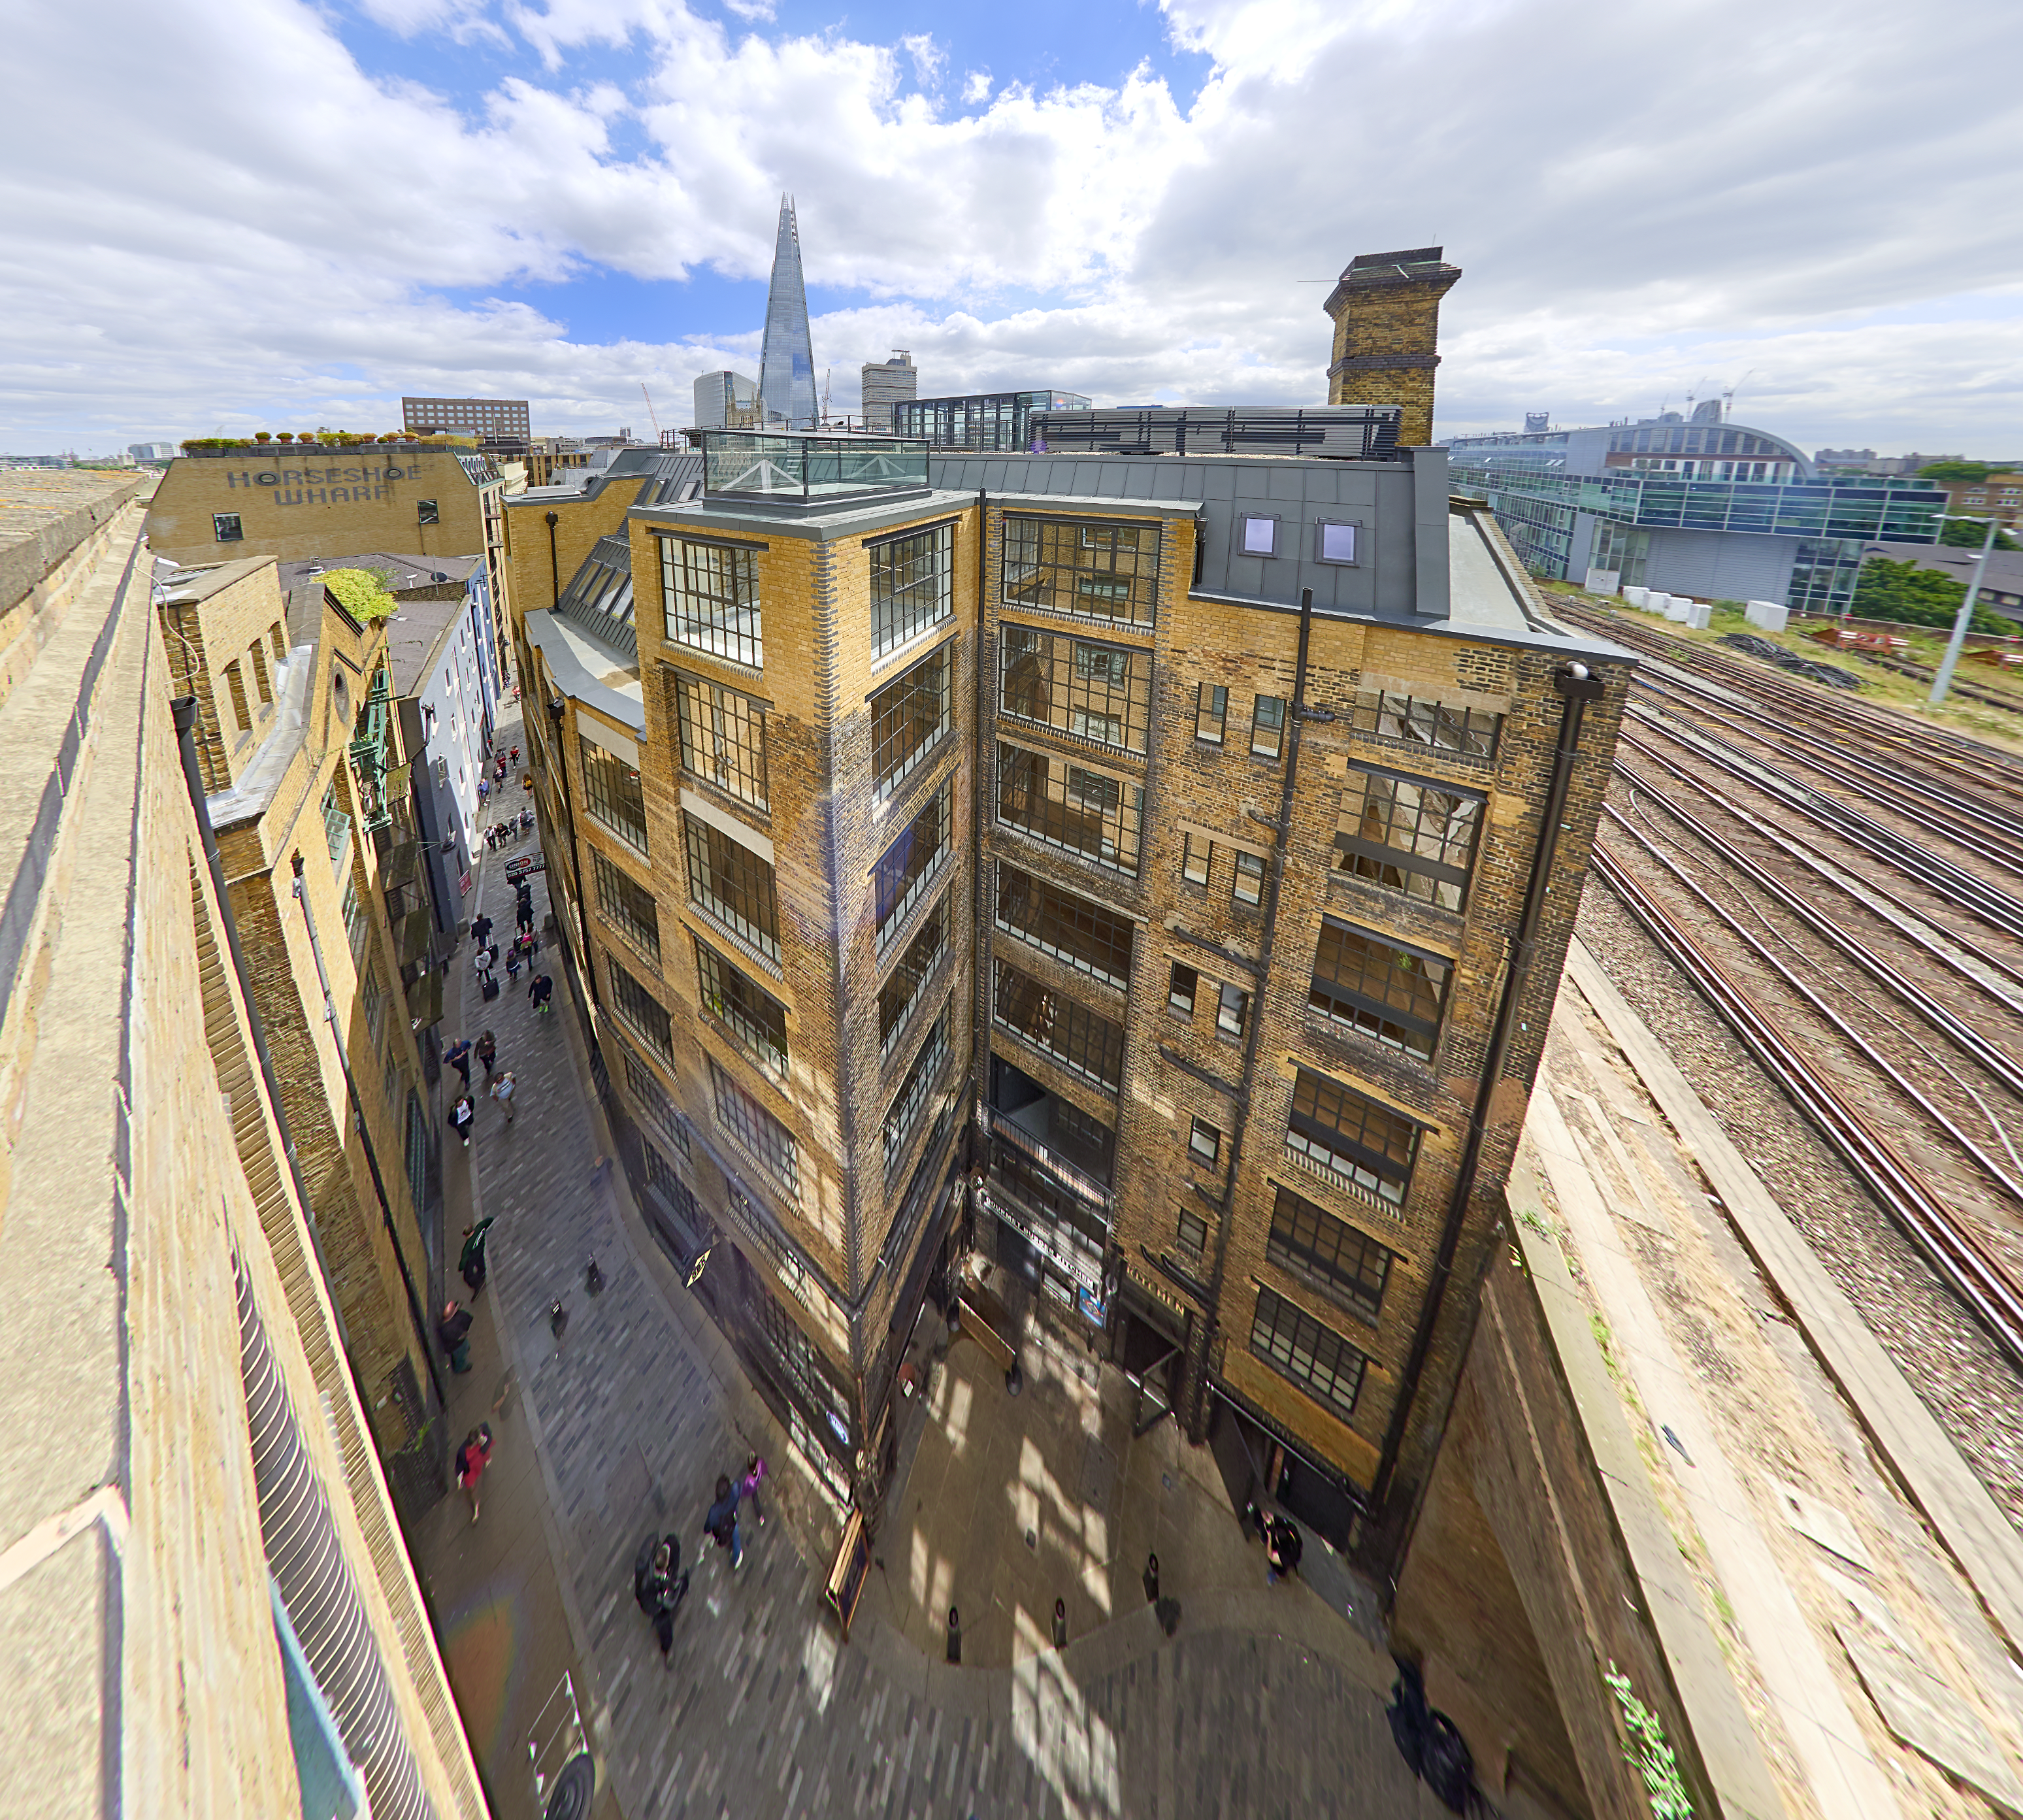 Angle Property secure two more lettings at Clink Street scheme